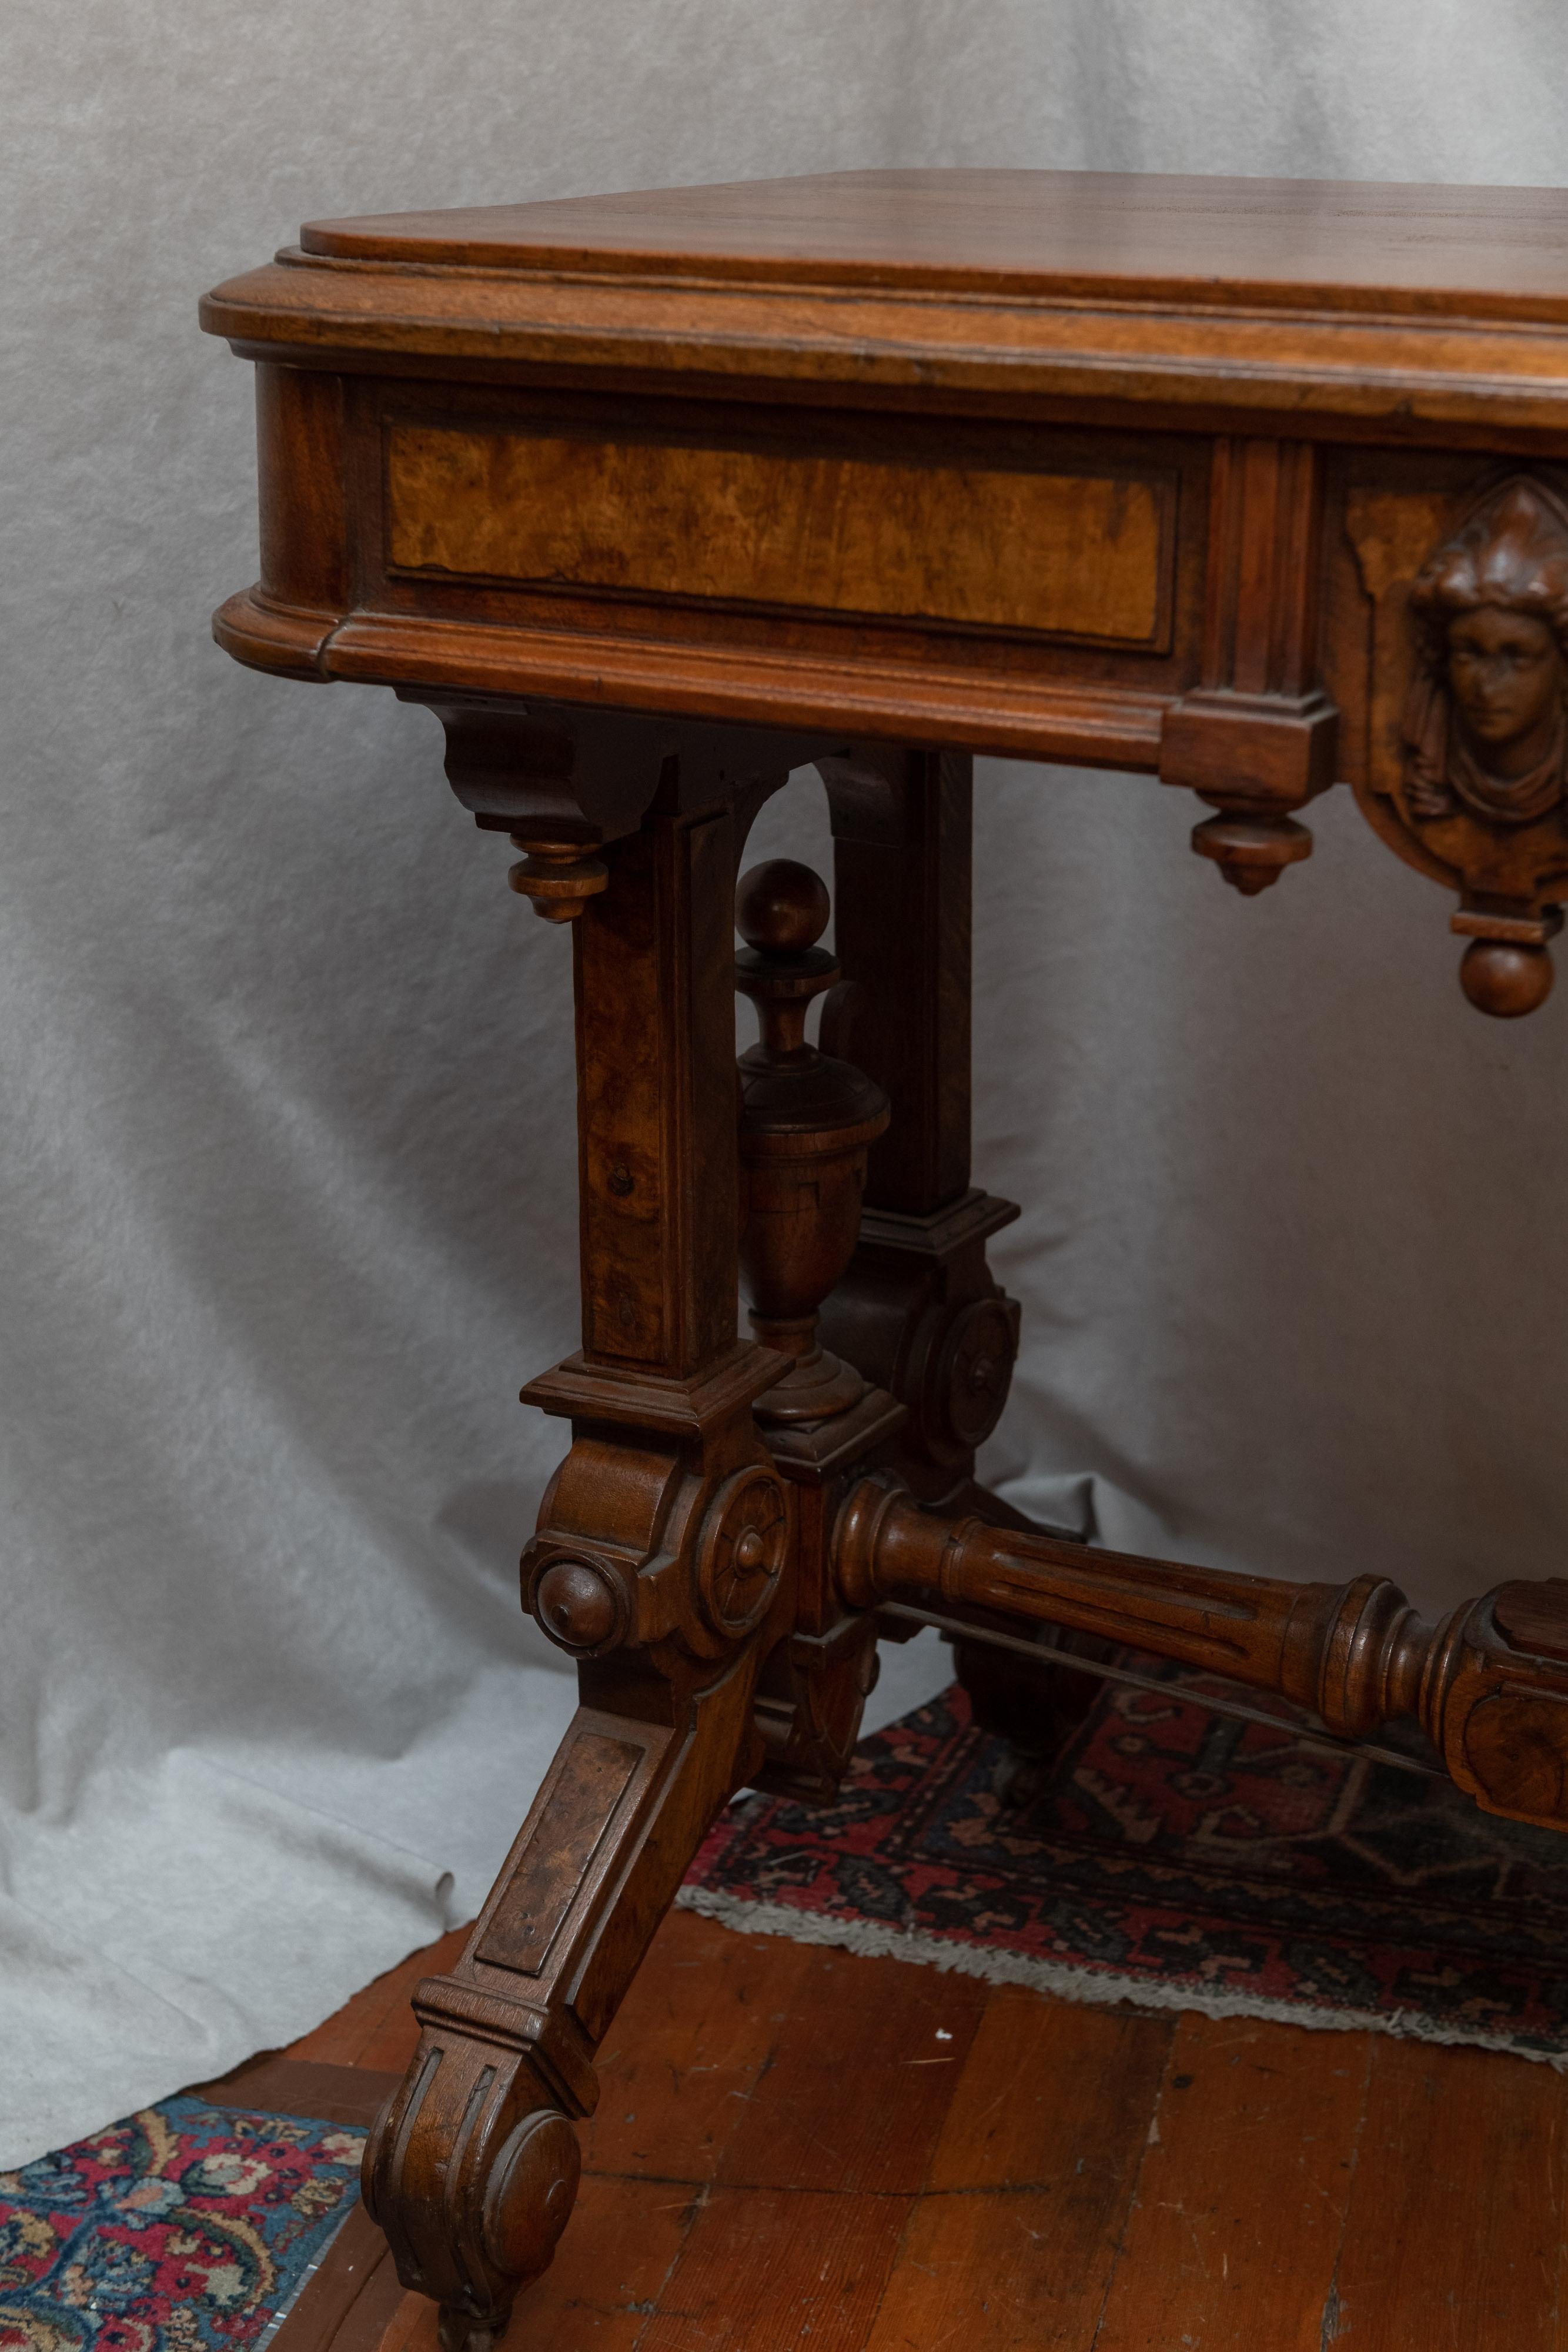 Late 19th Century American Renaissance Revival Victorian Walnut and Burl Library Table, circa 1870